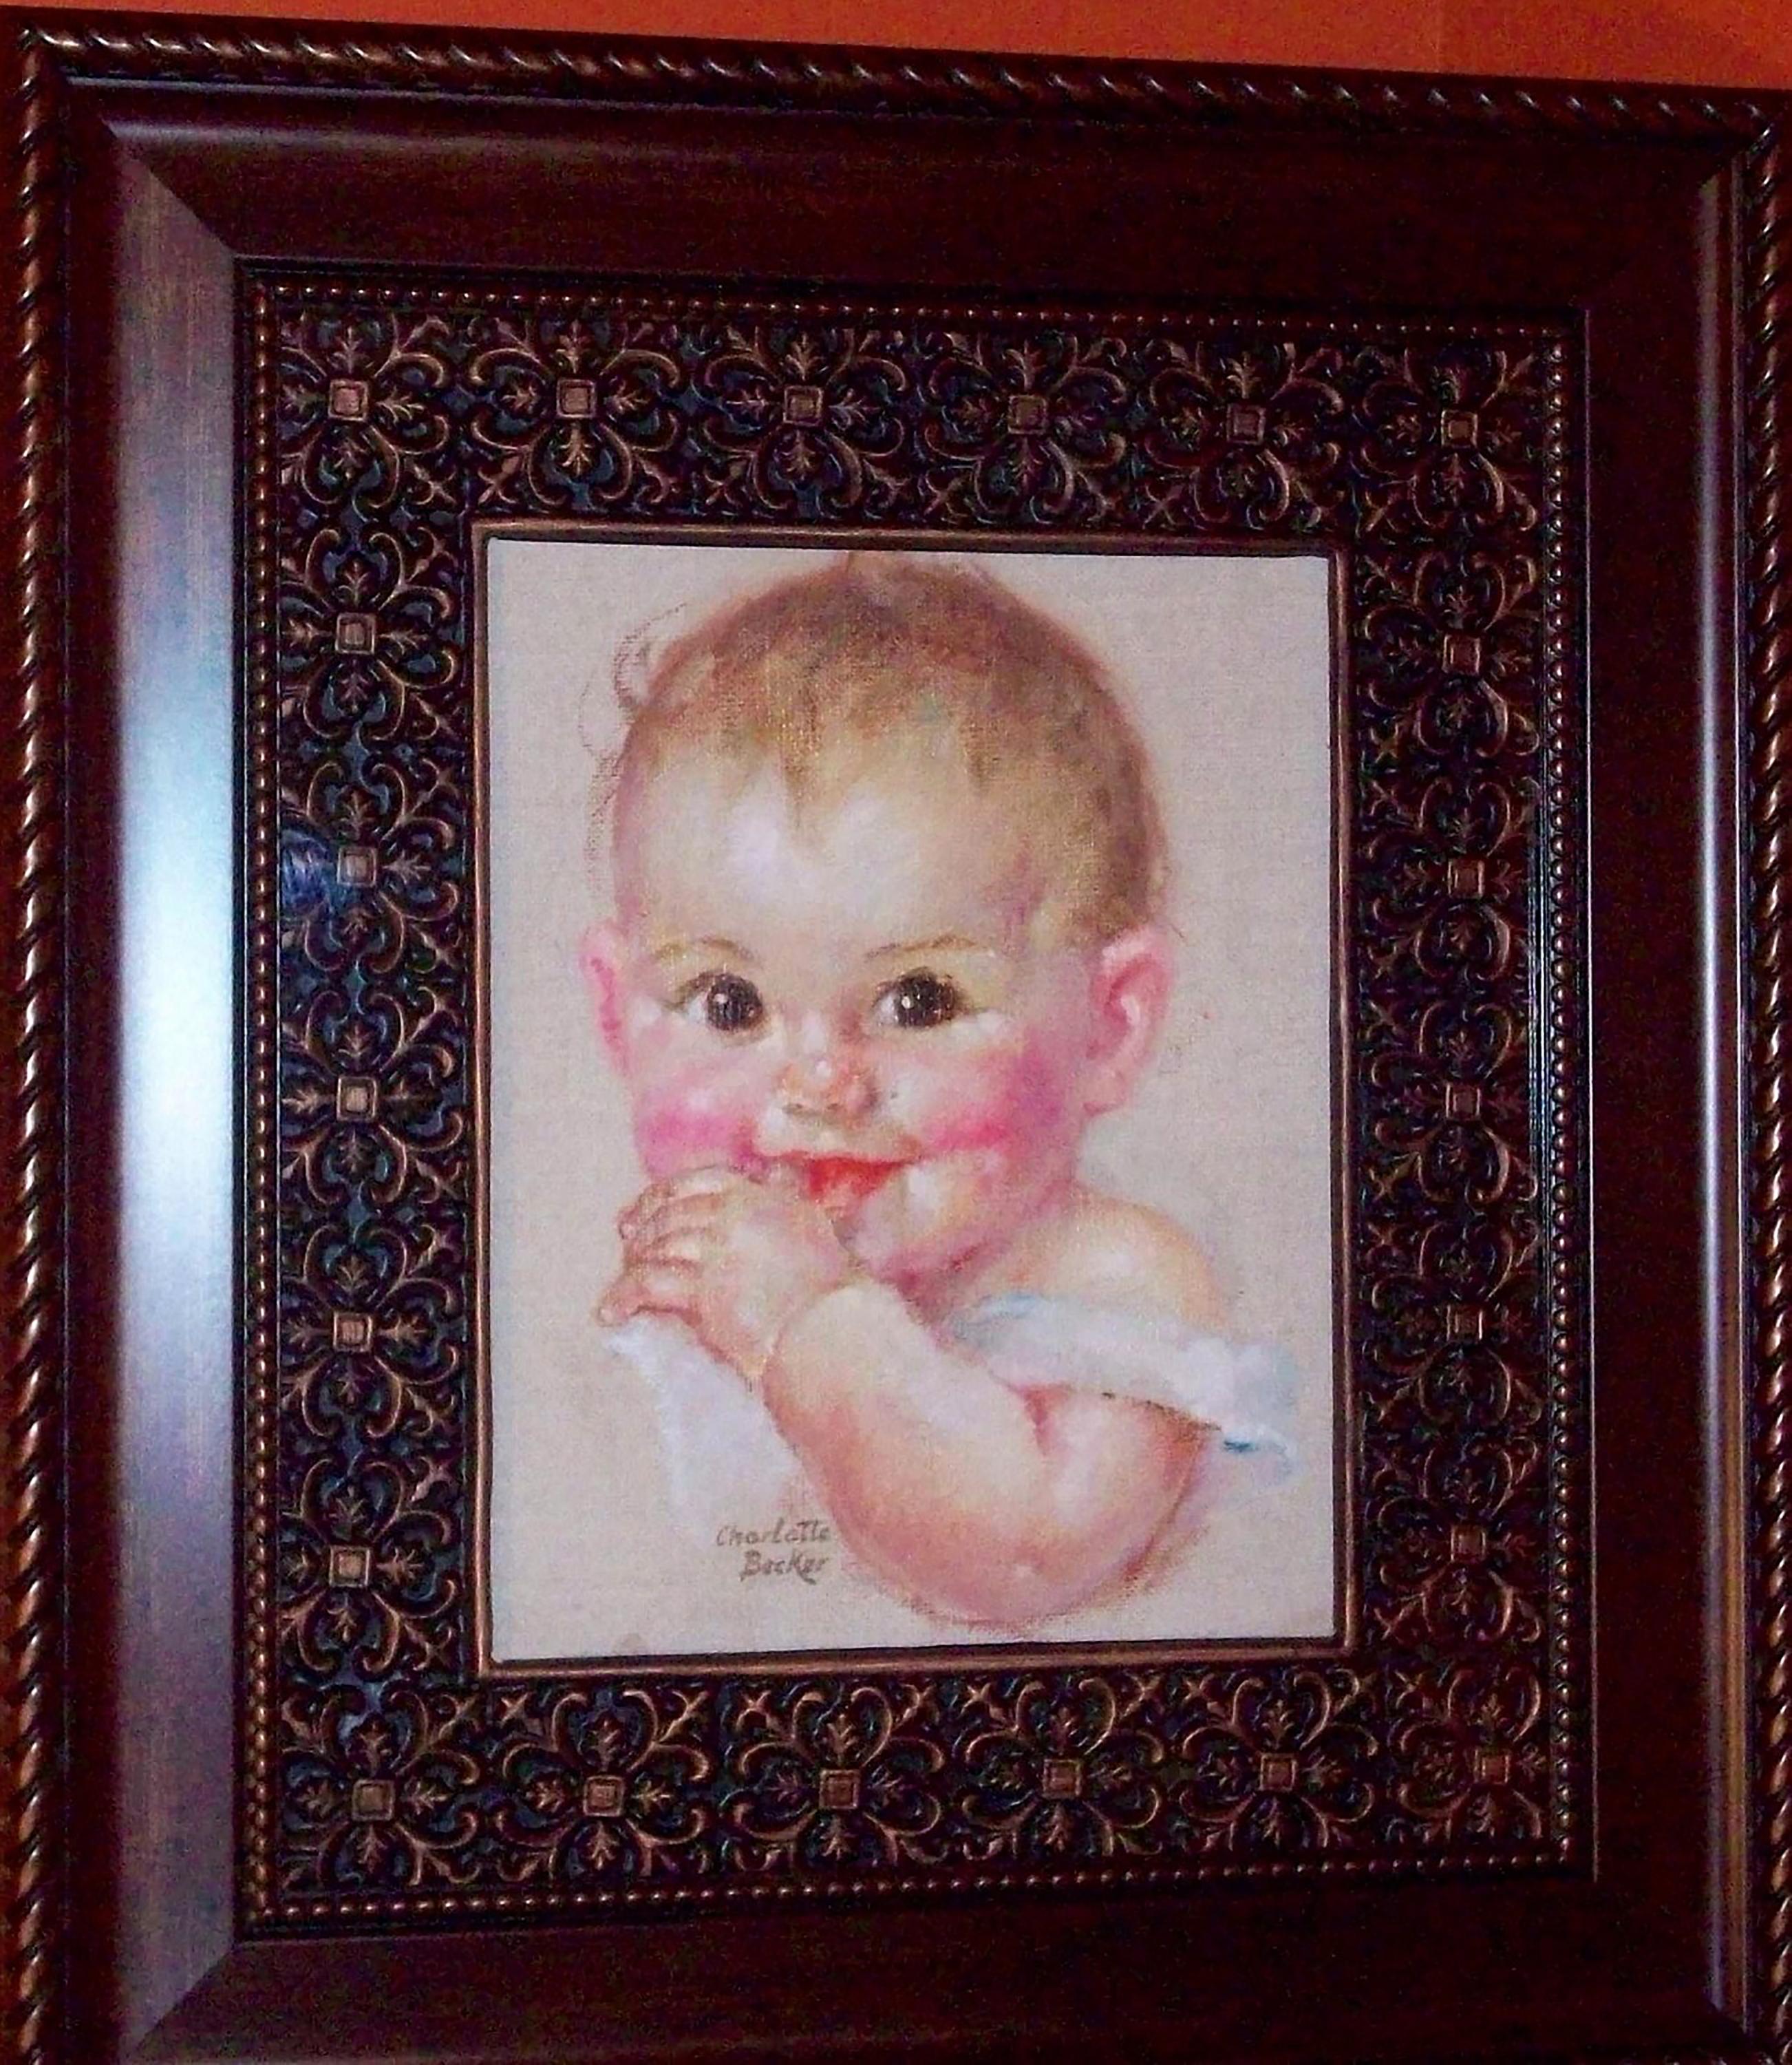 Wide-Eyed Baby - Painting by Charlotte Becker